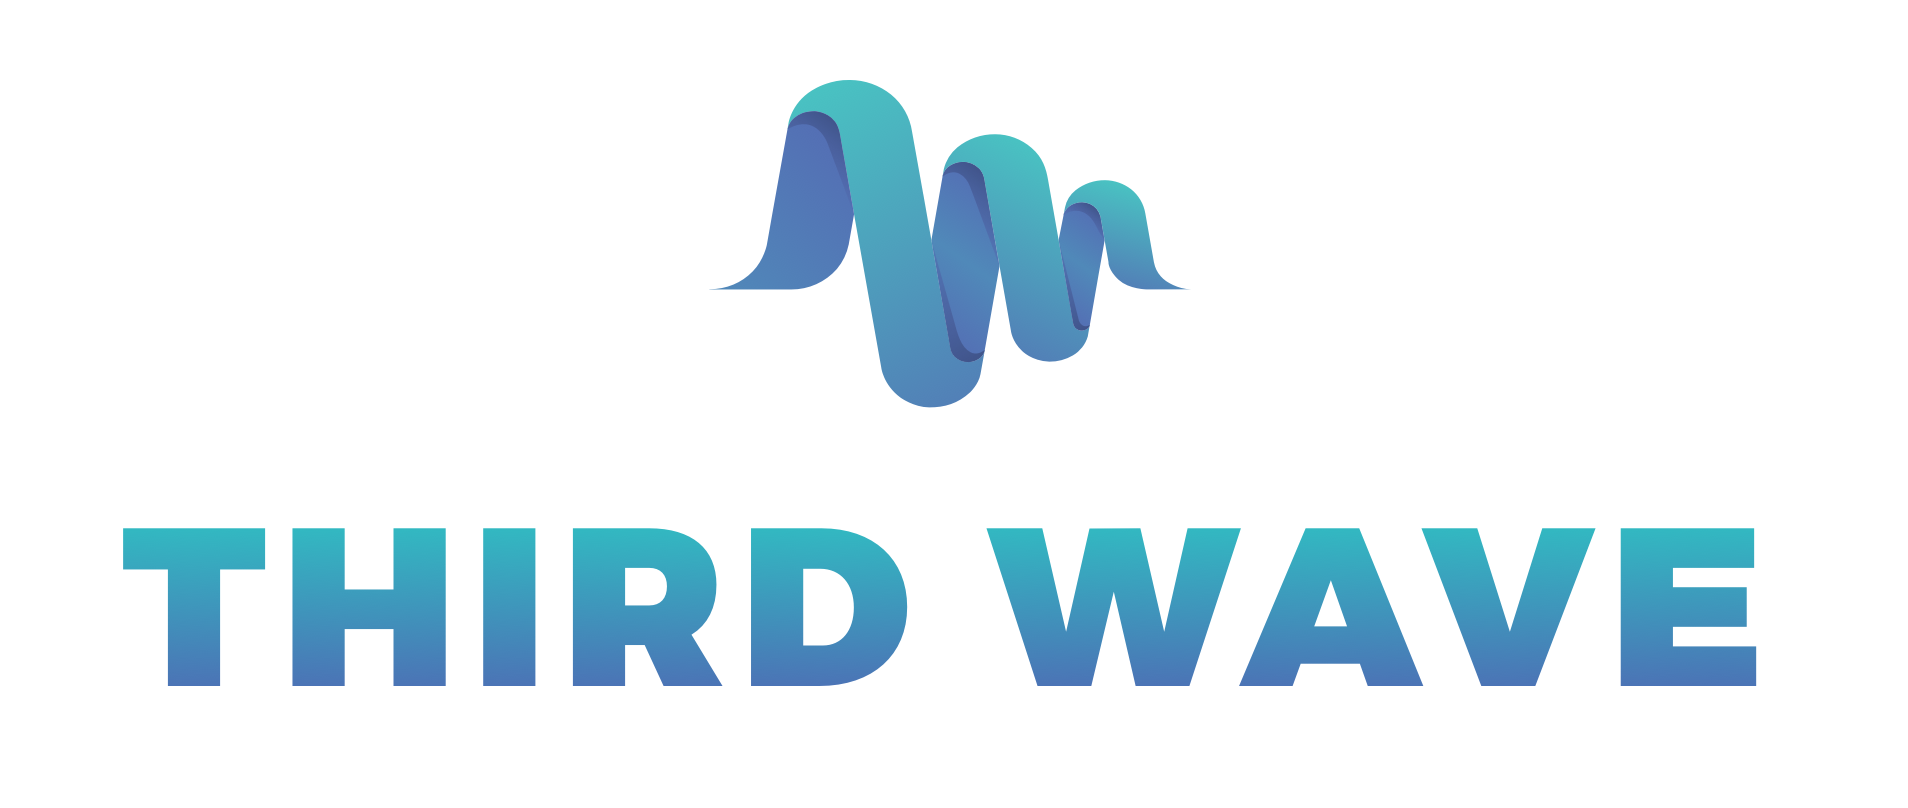 Third Wave’s mission is to provide a trusted and reputable resource for intentional, responsible psychedelic use. We do that by sharing research-based content and training that helps you feel safe, supported, and empowered as you follow your path towards personal transformation with psychedelics.
